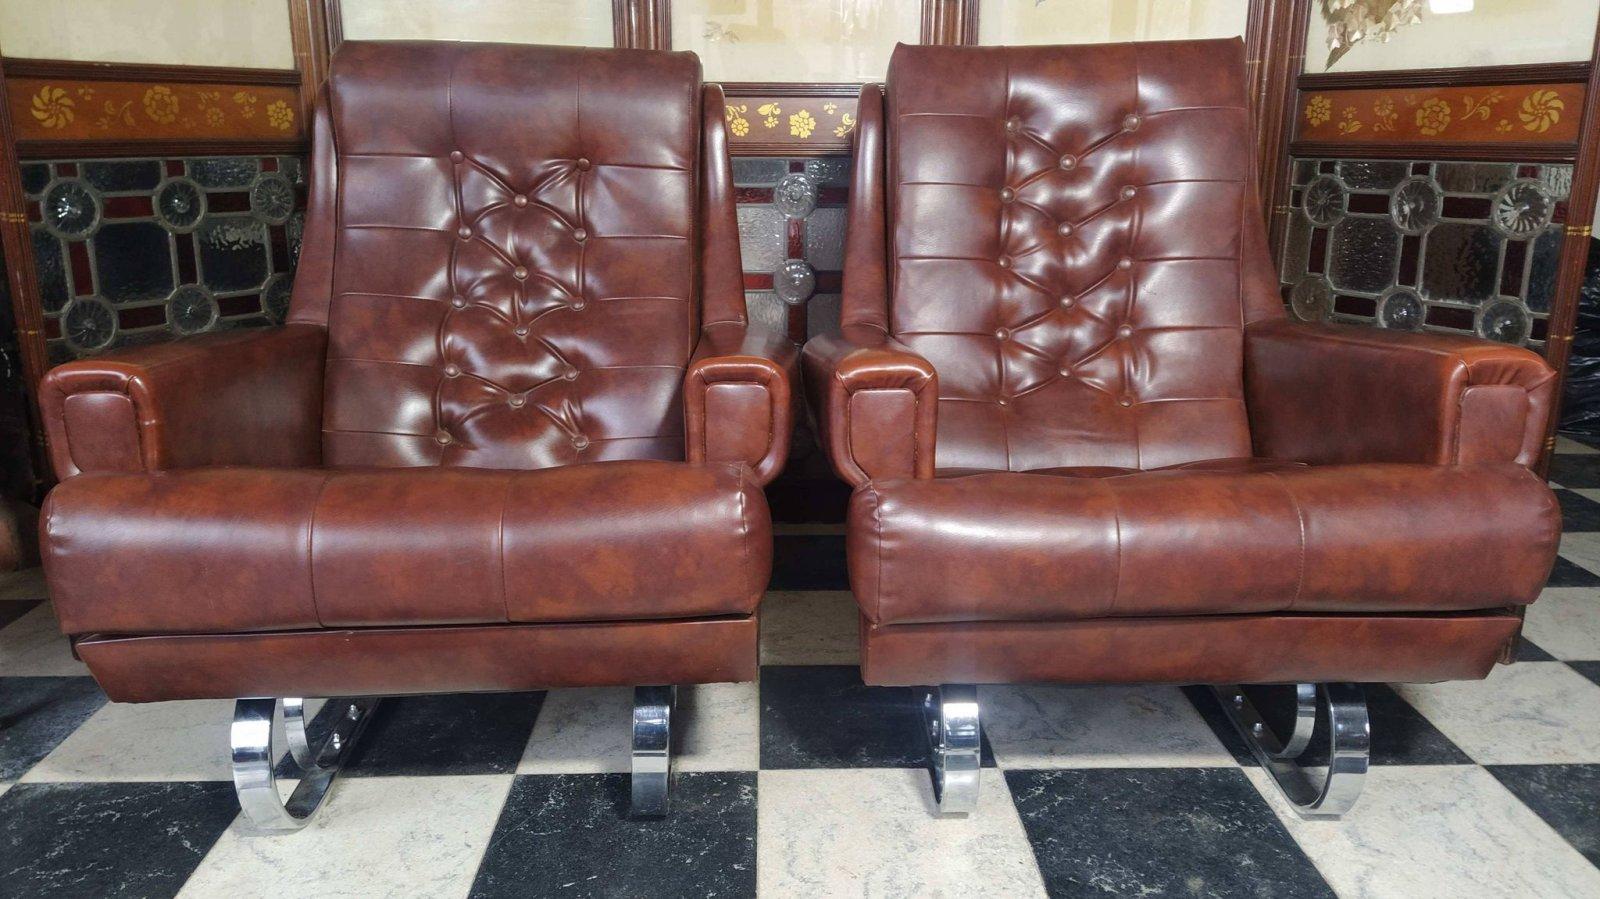 A pair of Mid-Century Modern French Cantilever armchairs with the original brown vinyl upholstery, both in really good condition. The chrome cantilever base gives it a stylish look and a gentle relaxing movement when one sits in it or rocks it.